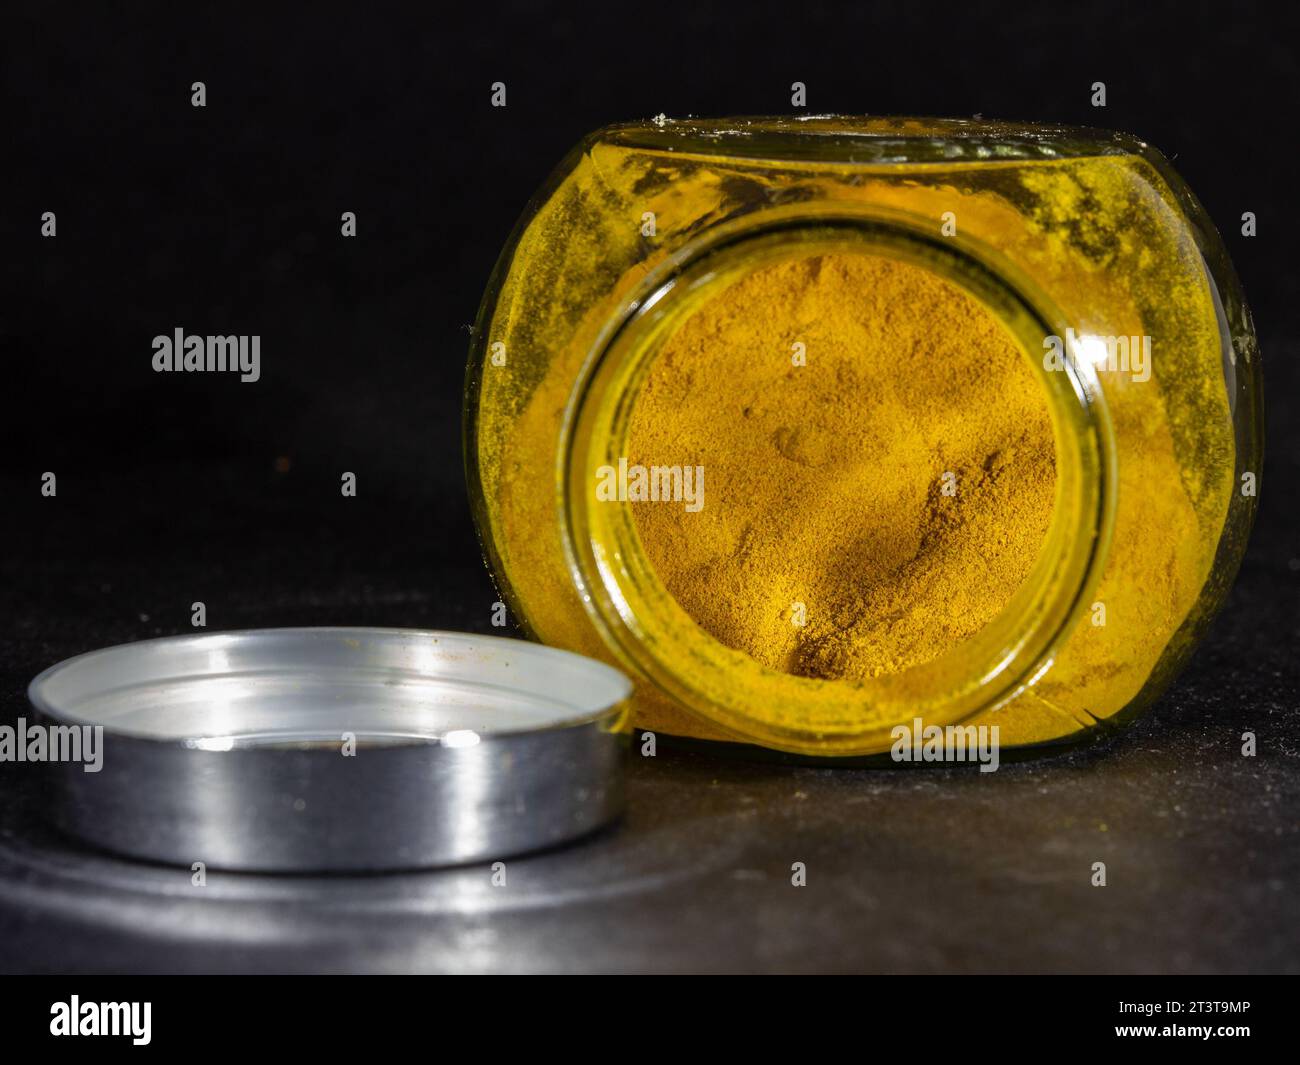 Picture of a jar of turmeric powder on a black background. Turmeric or Curcuma longa, is a flowering plant in the ginger family Zingiberaceae. It is a Stock Photo